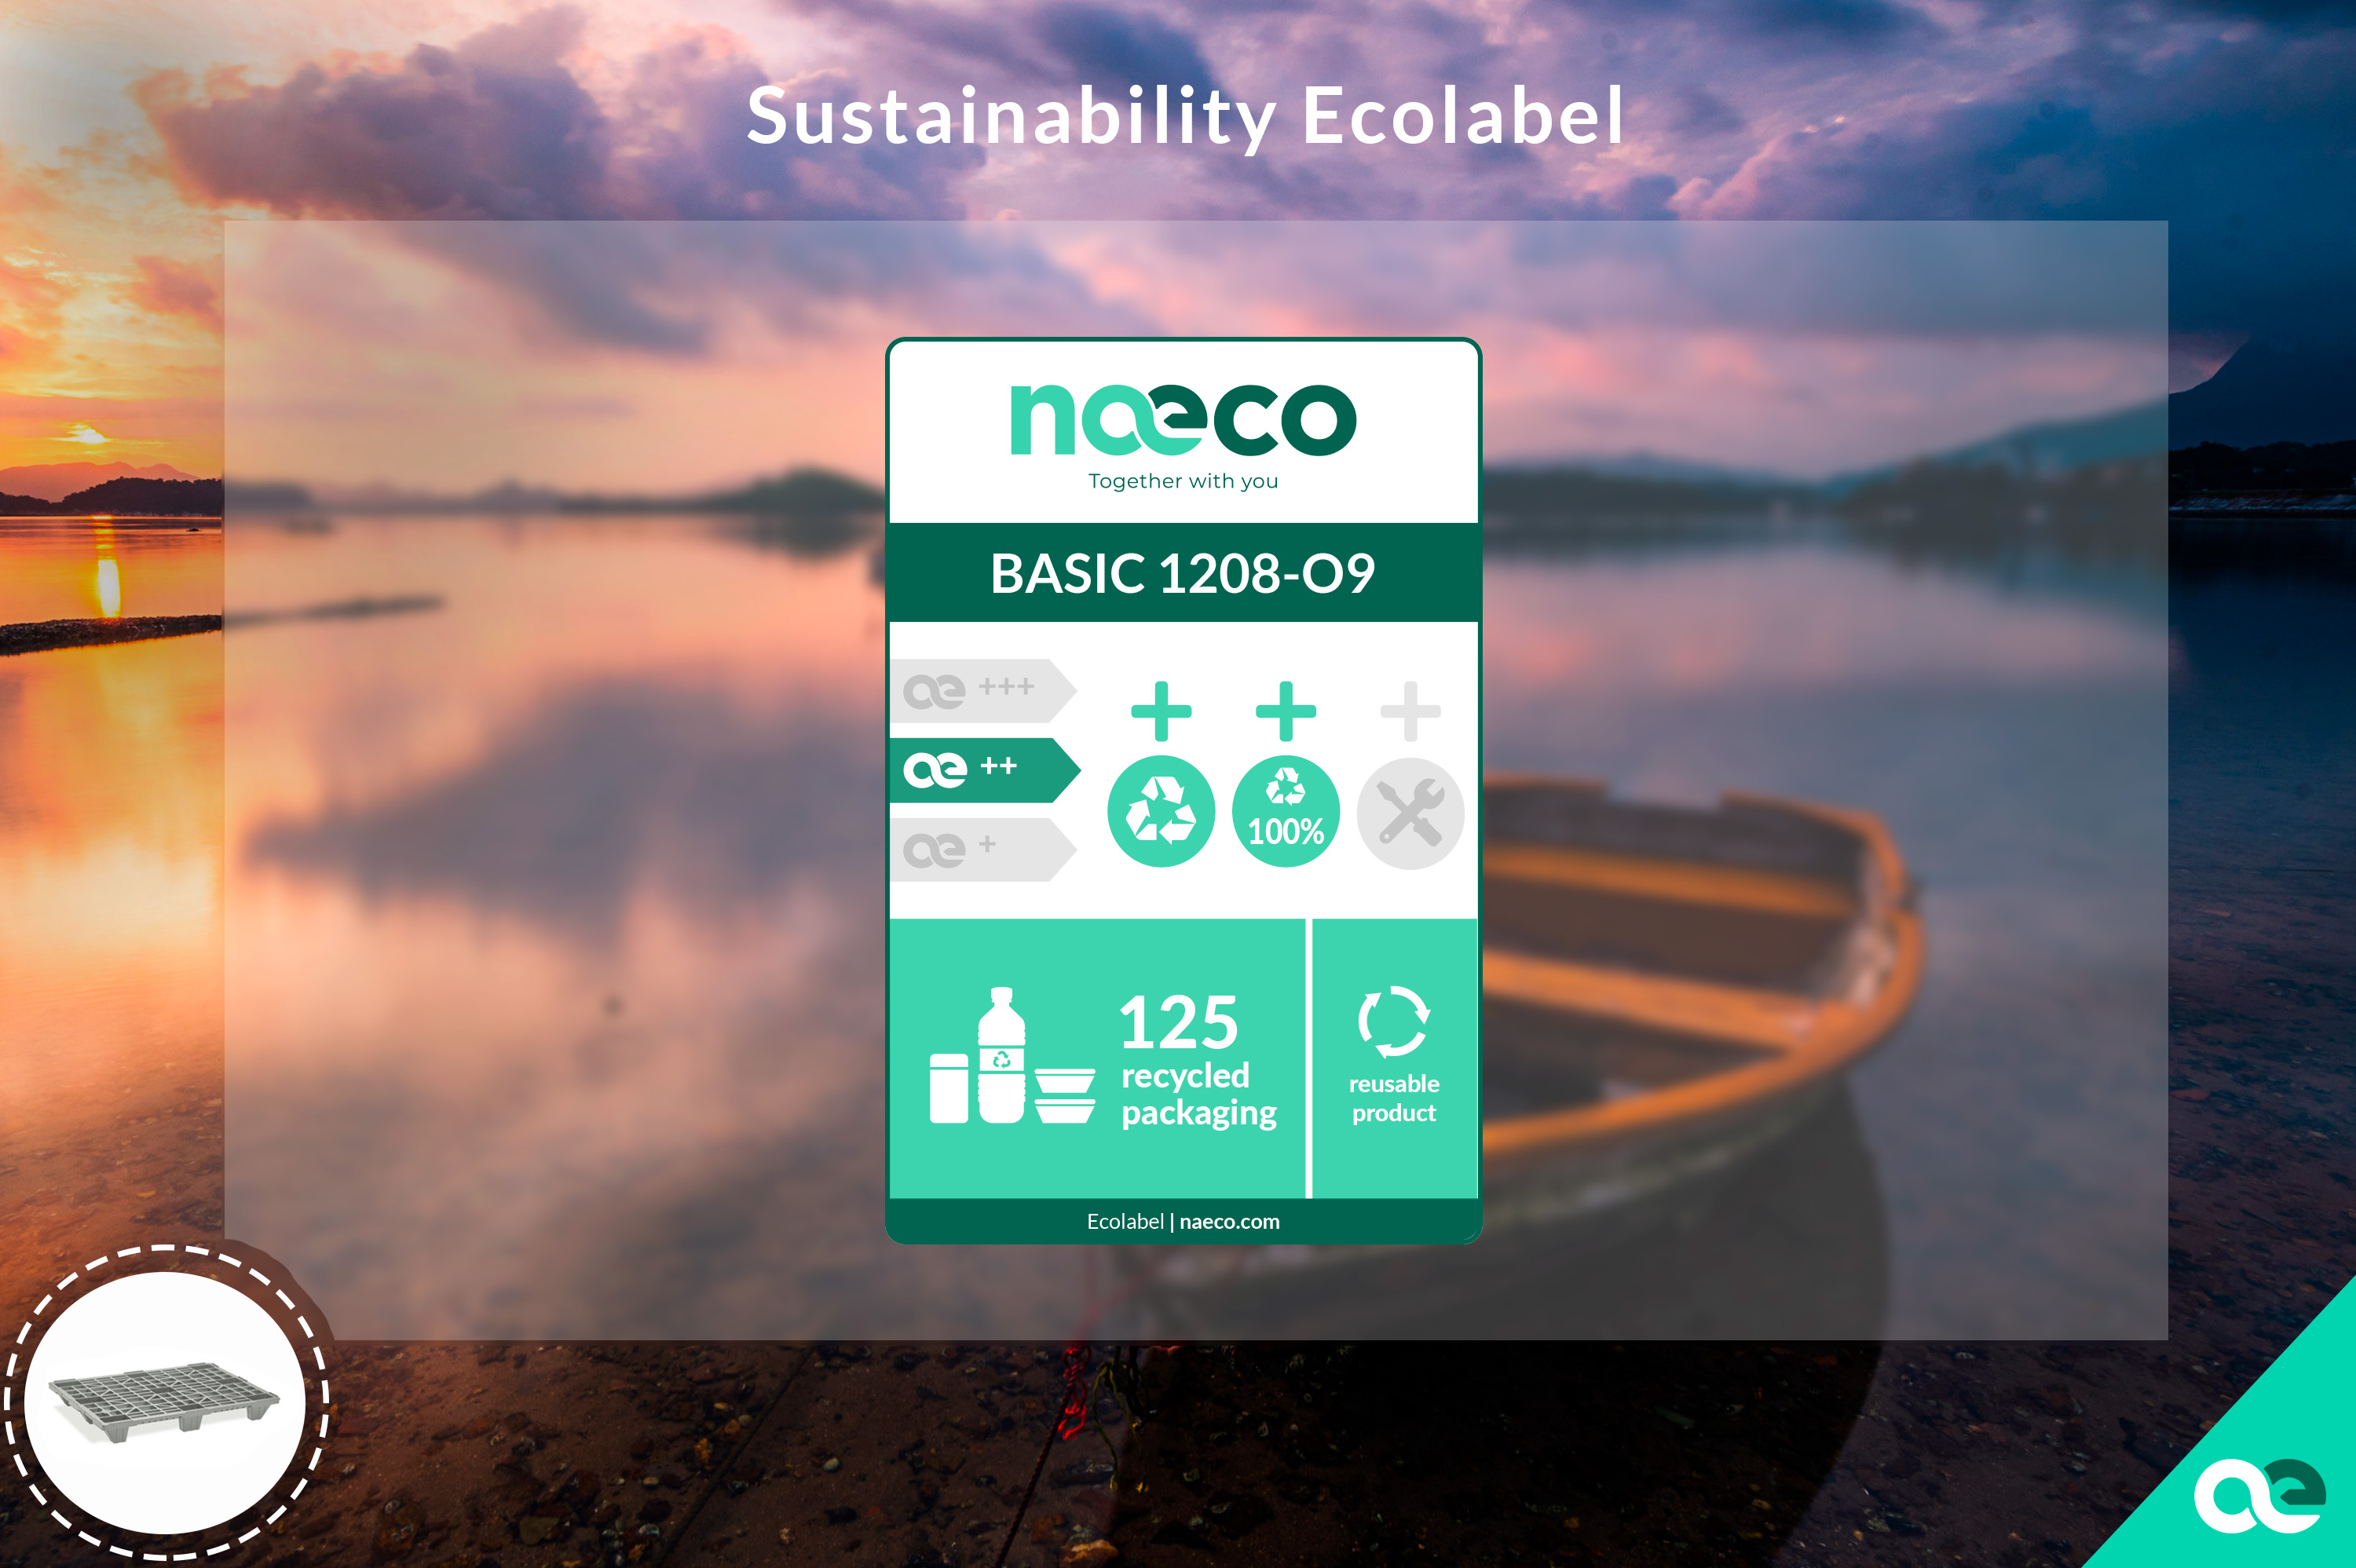 Naeco updates the information on its eco-label to comply with the requirements of Law 7/2022 on waste and contaminated soils.